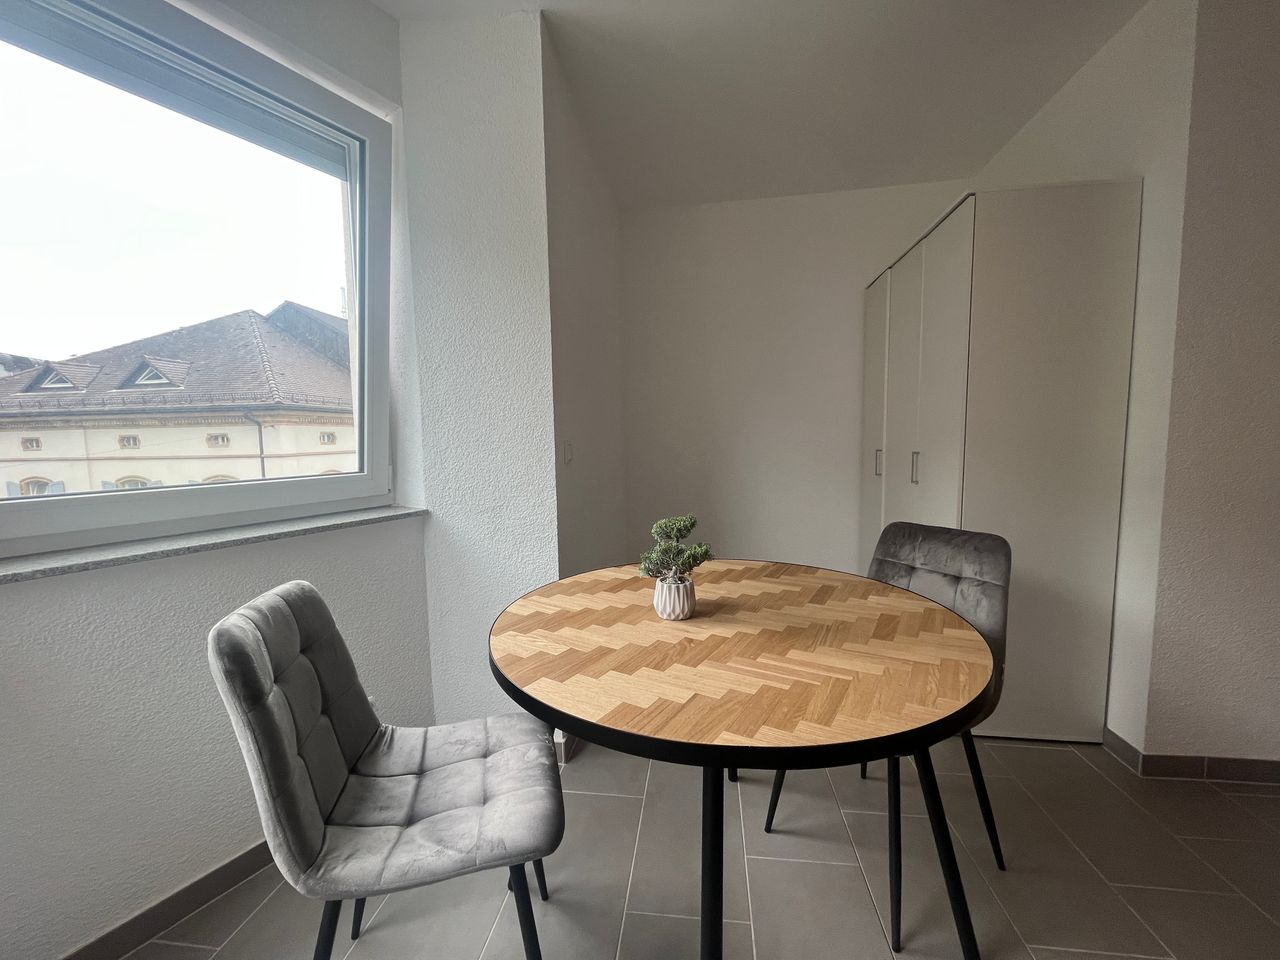 Simplex Apartments: cetral located apartment, Karlsruhe near "Postgalerie"